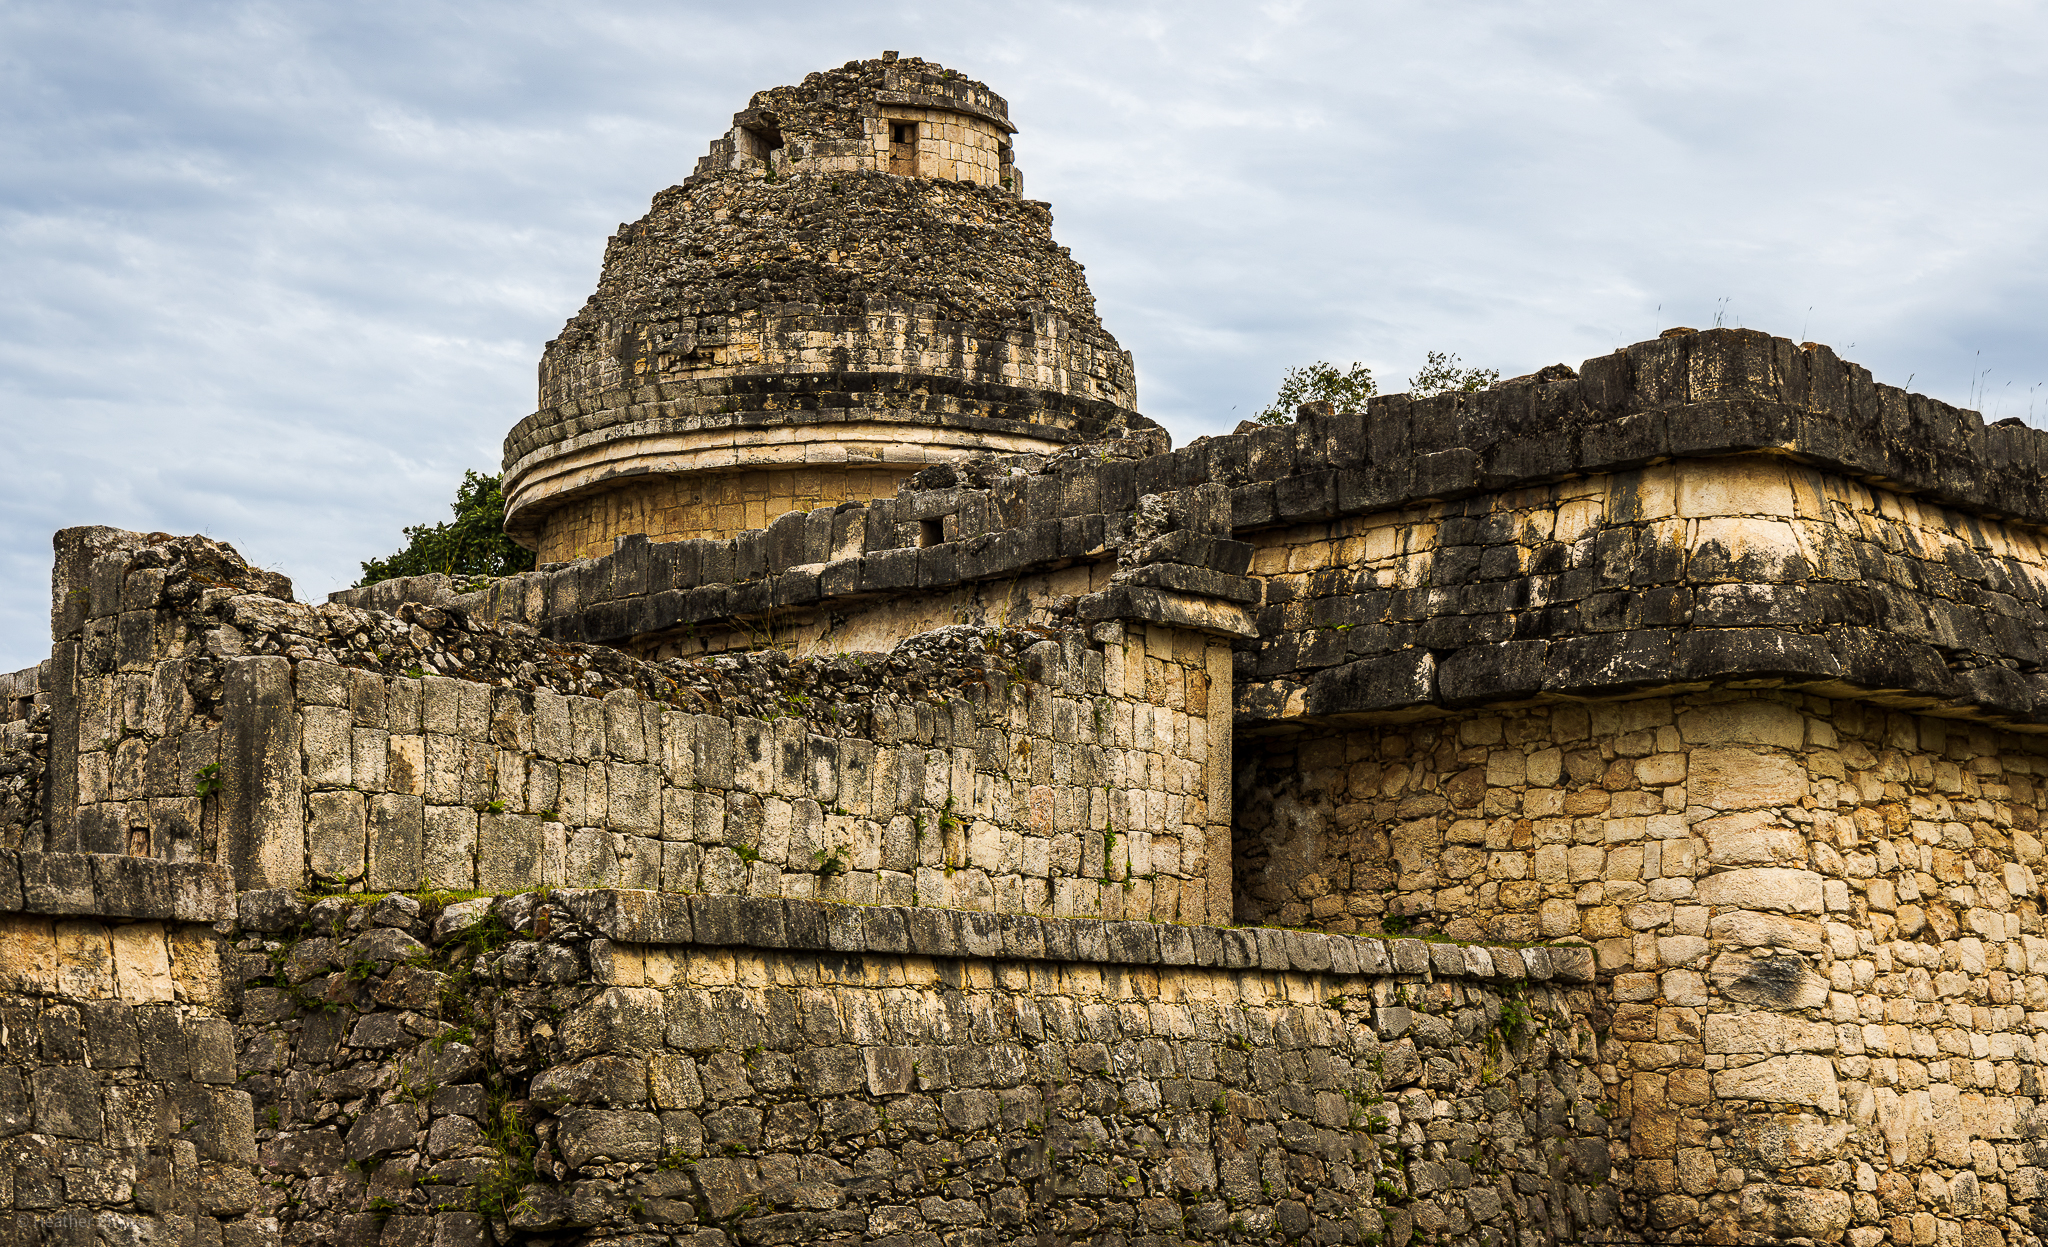 The Caracol, or Observatory, at Chichen Itza, against a backdrop of blue sky and clouds. The circular building on a large square platform, known for its astronomical significance, stands as a testament to Mayan ingenuity.